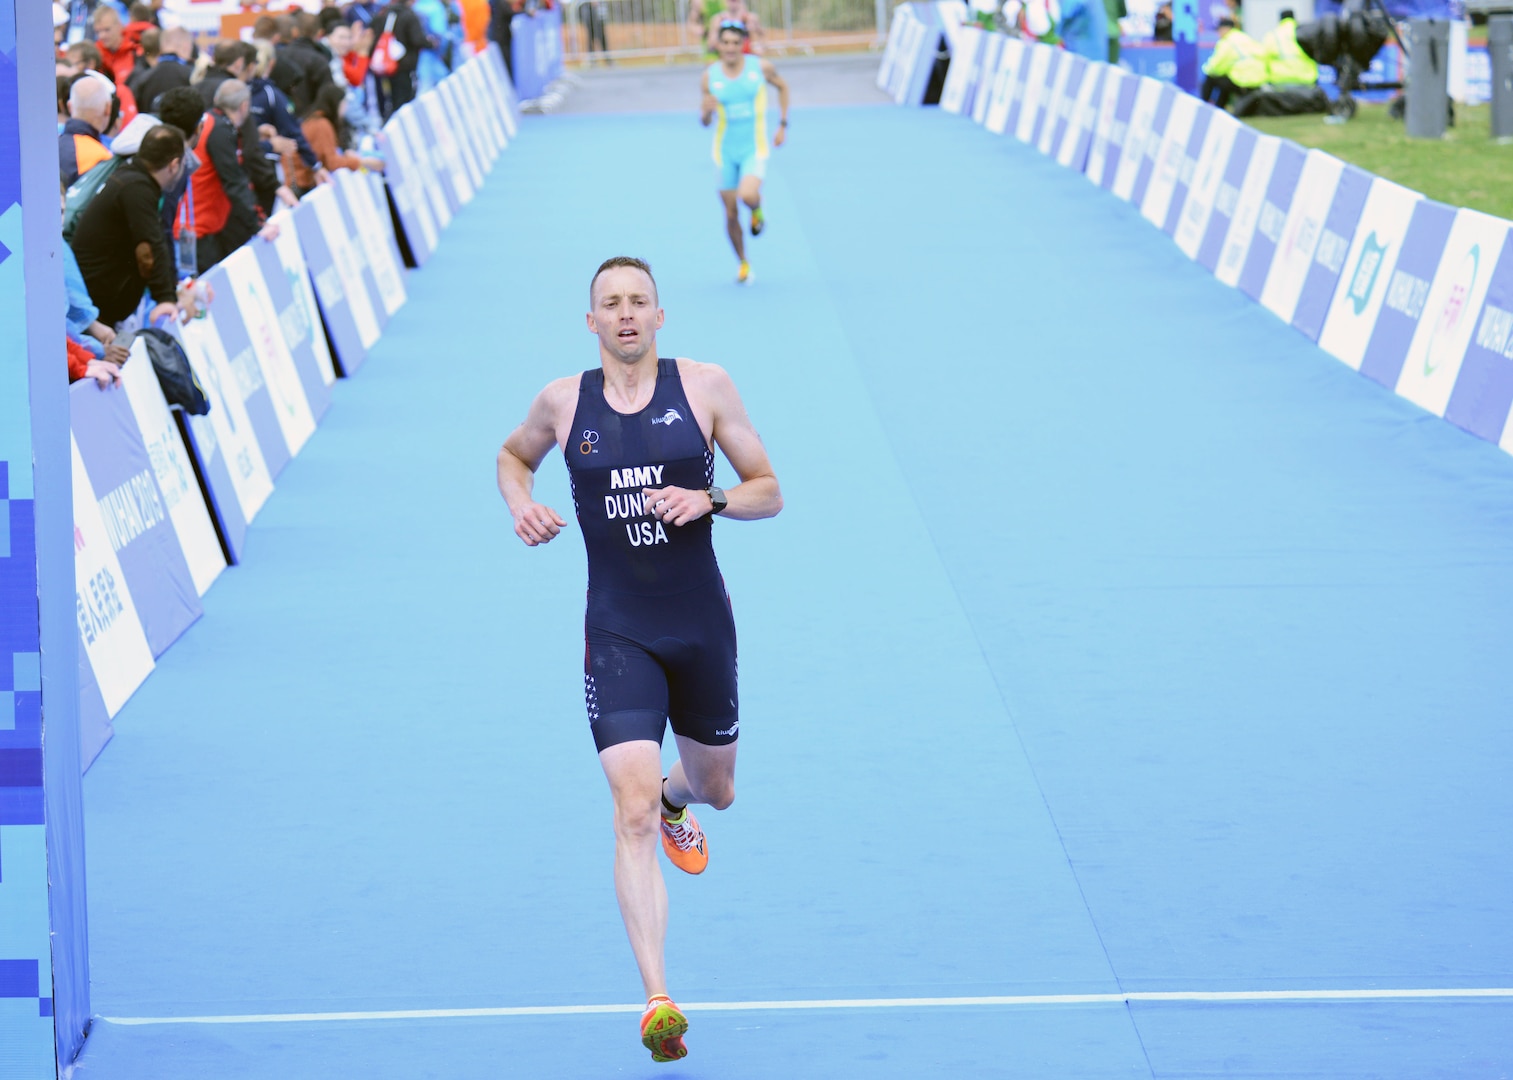 U.S. Army Lt. Col. Bryan Dunker crosses the finish line of the men's triathlon awith a time of 2:03:12 at the Military World Games in Wuhan, China, Oct. 27, 2019. He finished 12th in the men's senior division, helping secure a silver medal for the USA mixed seniors team.